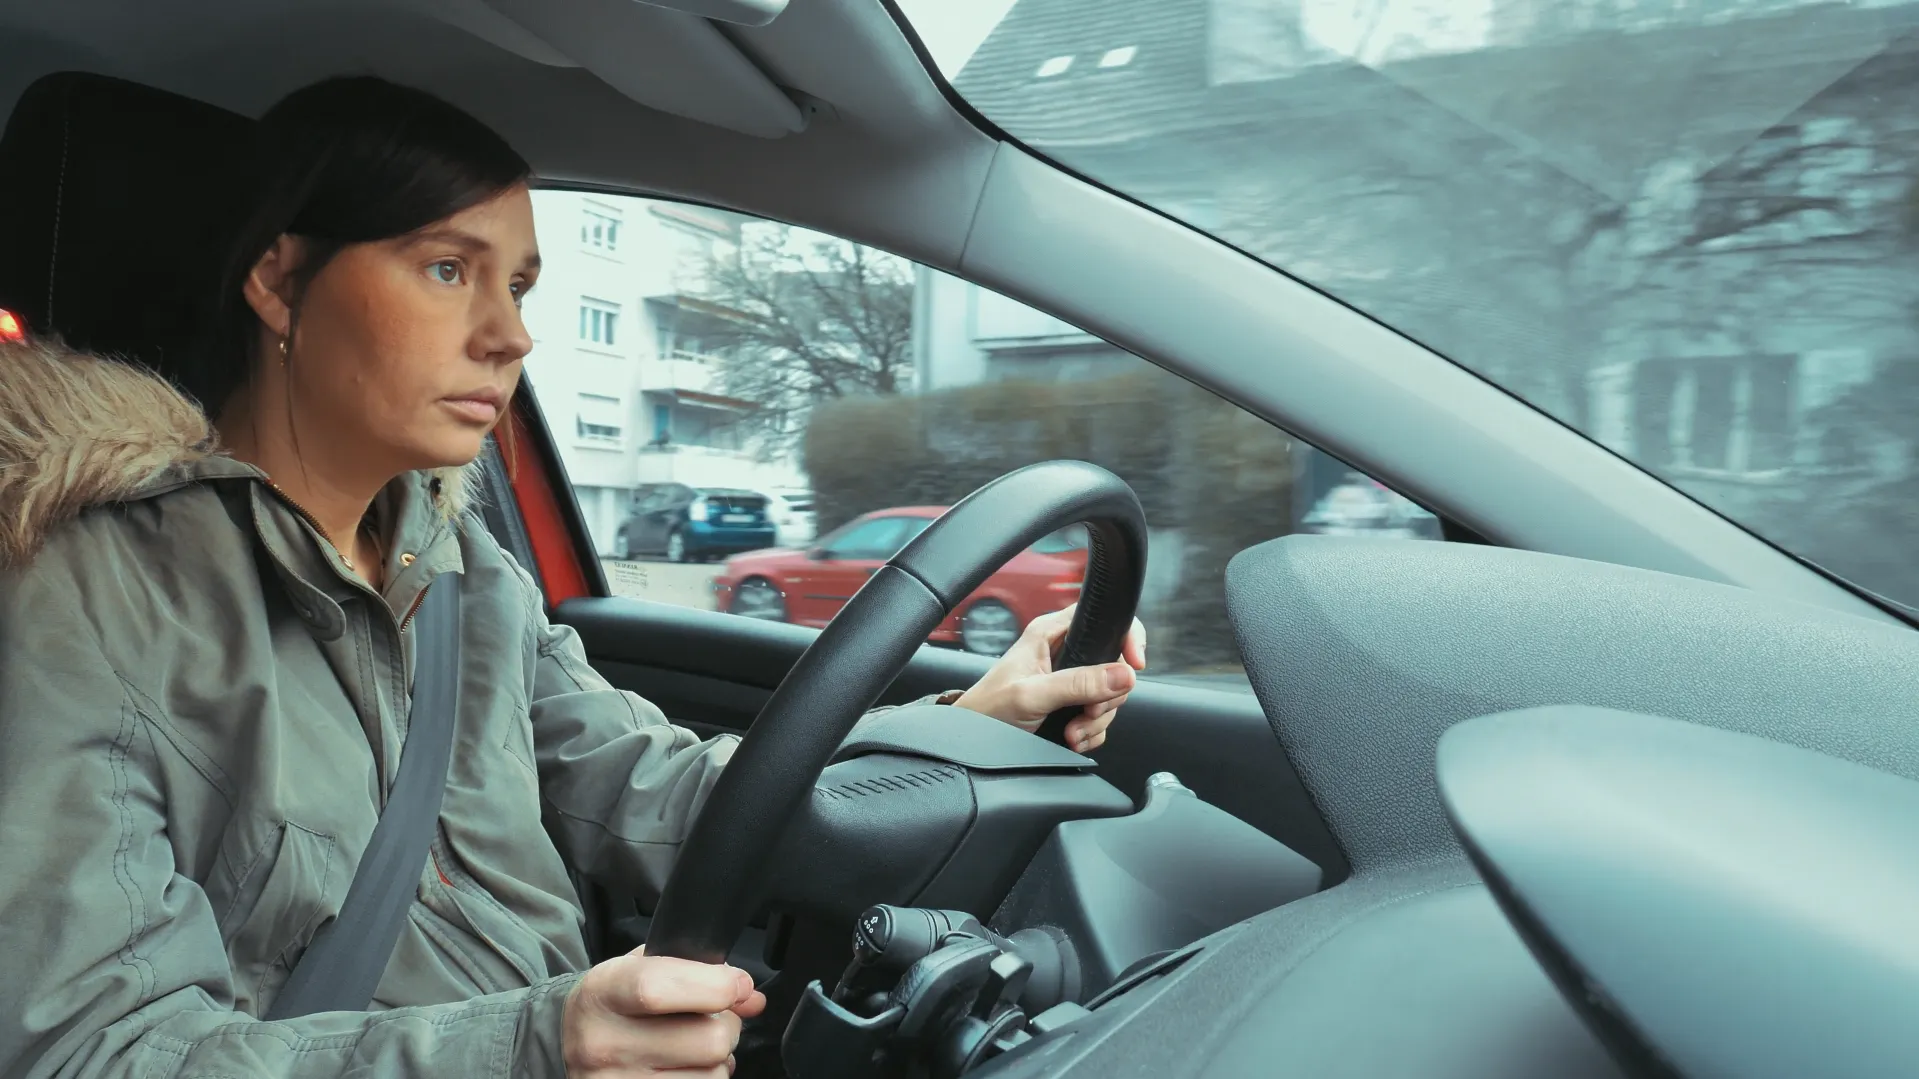 Fatigue driving is a major factor in accidents, with just 4 hours of sleep increasing the risk of an accident tenfold.But, with a Driver Monitoring System (DMS), tragedies from fatigue driving can be prevented.Besides detecting fatigue, DMS also monitors seat-belt usage and driver distraction. 